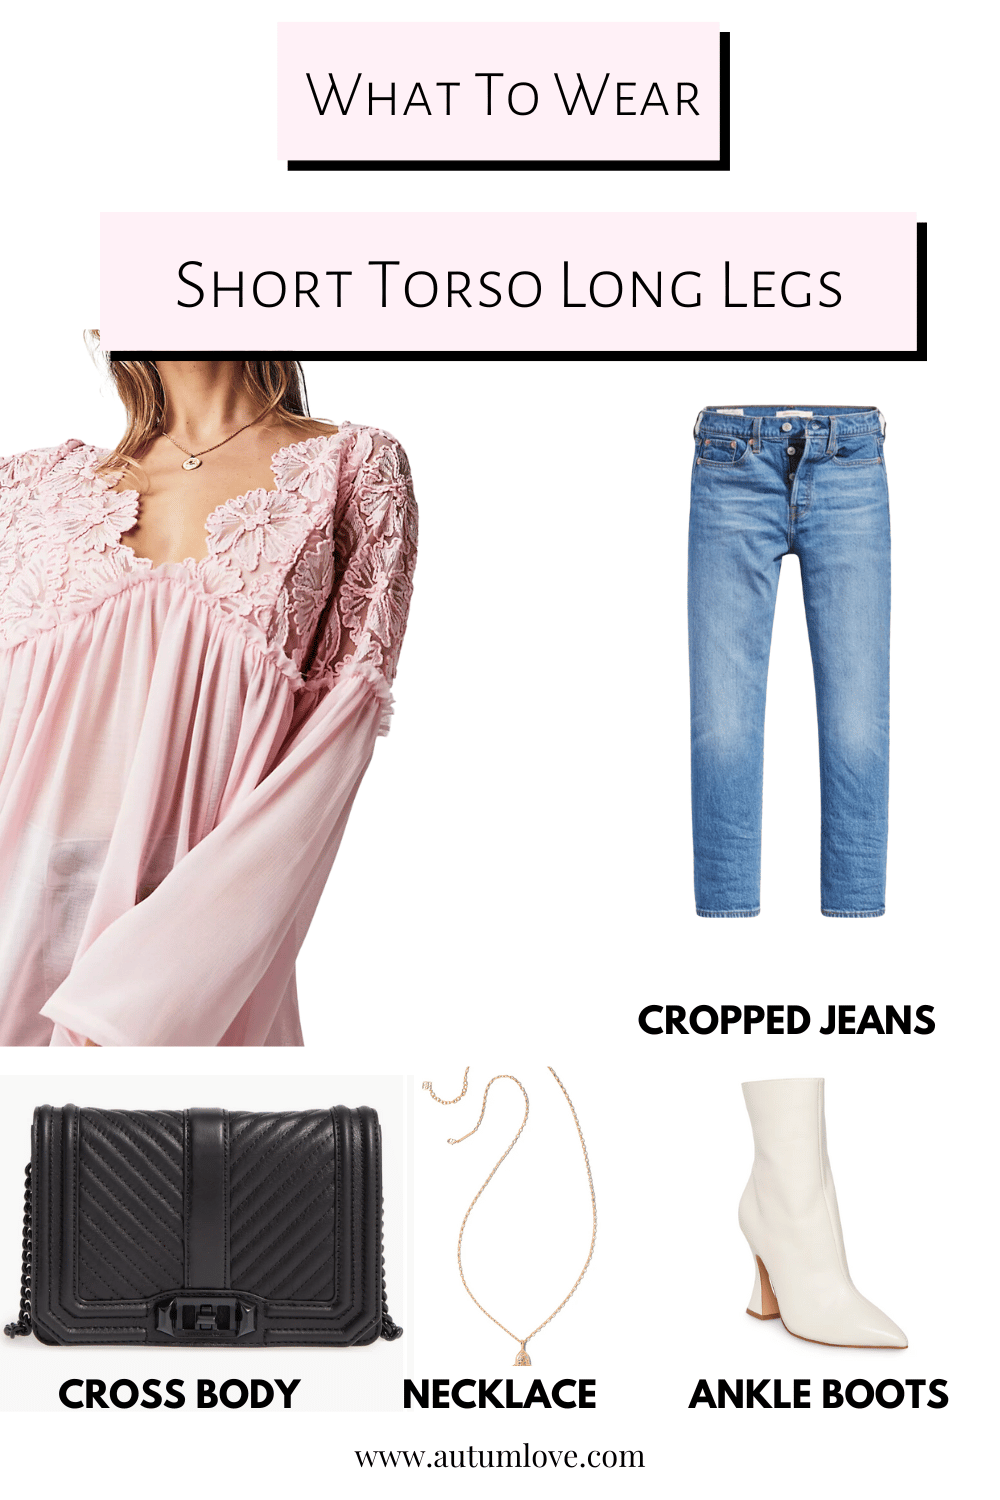 10 Tips to Style Activewear for Short Torso Long Legs Body Type 